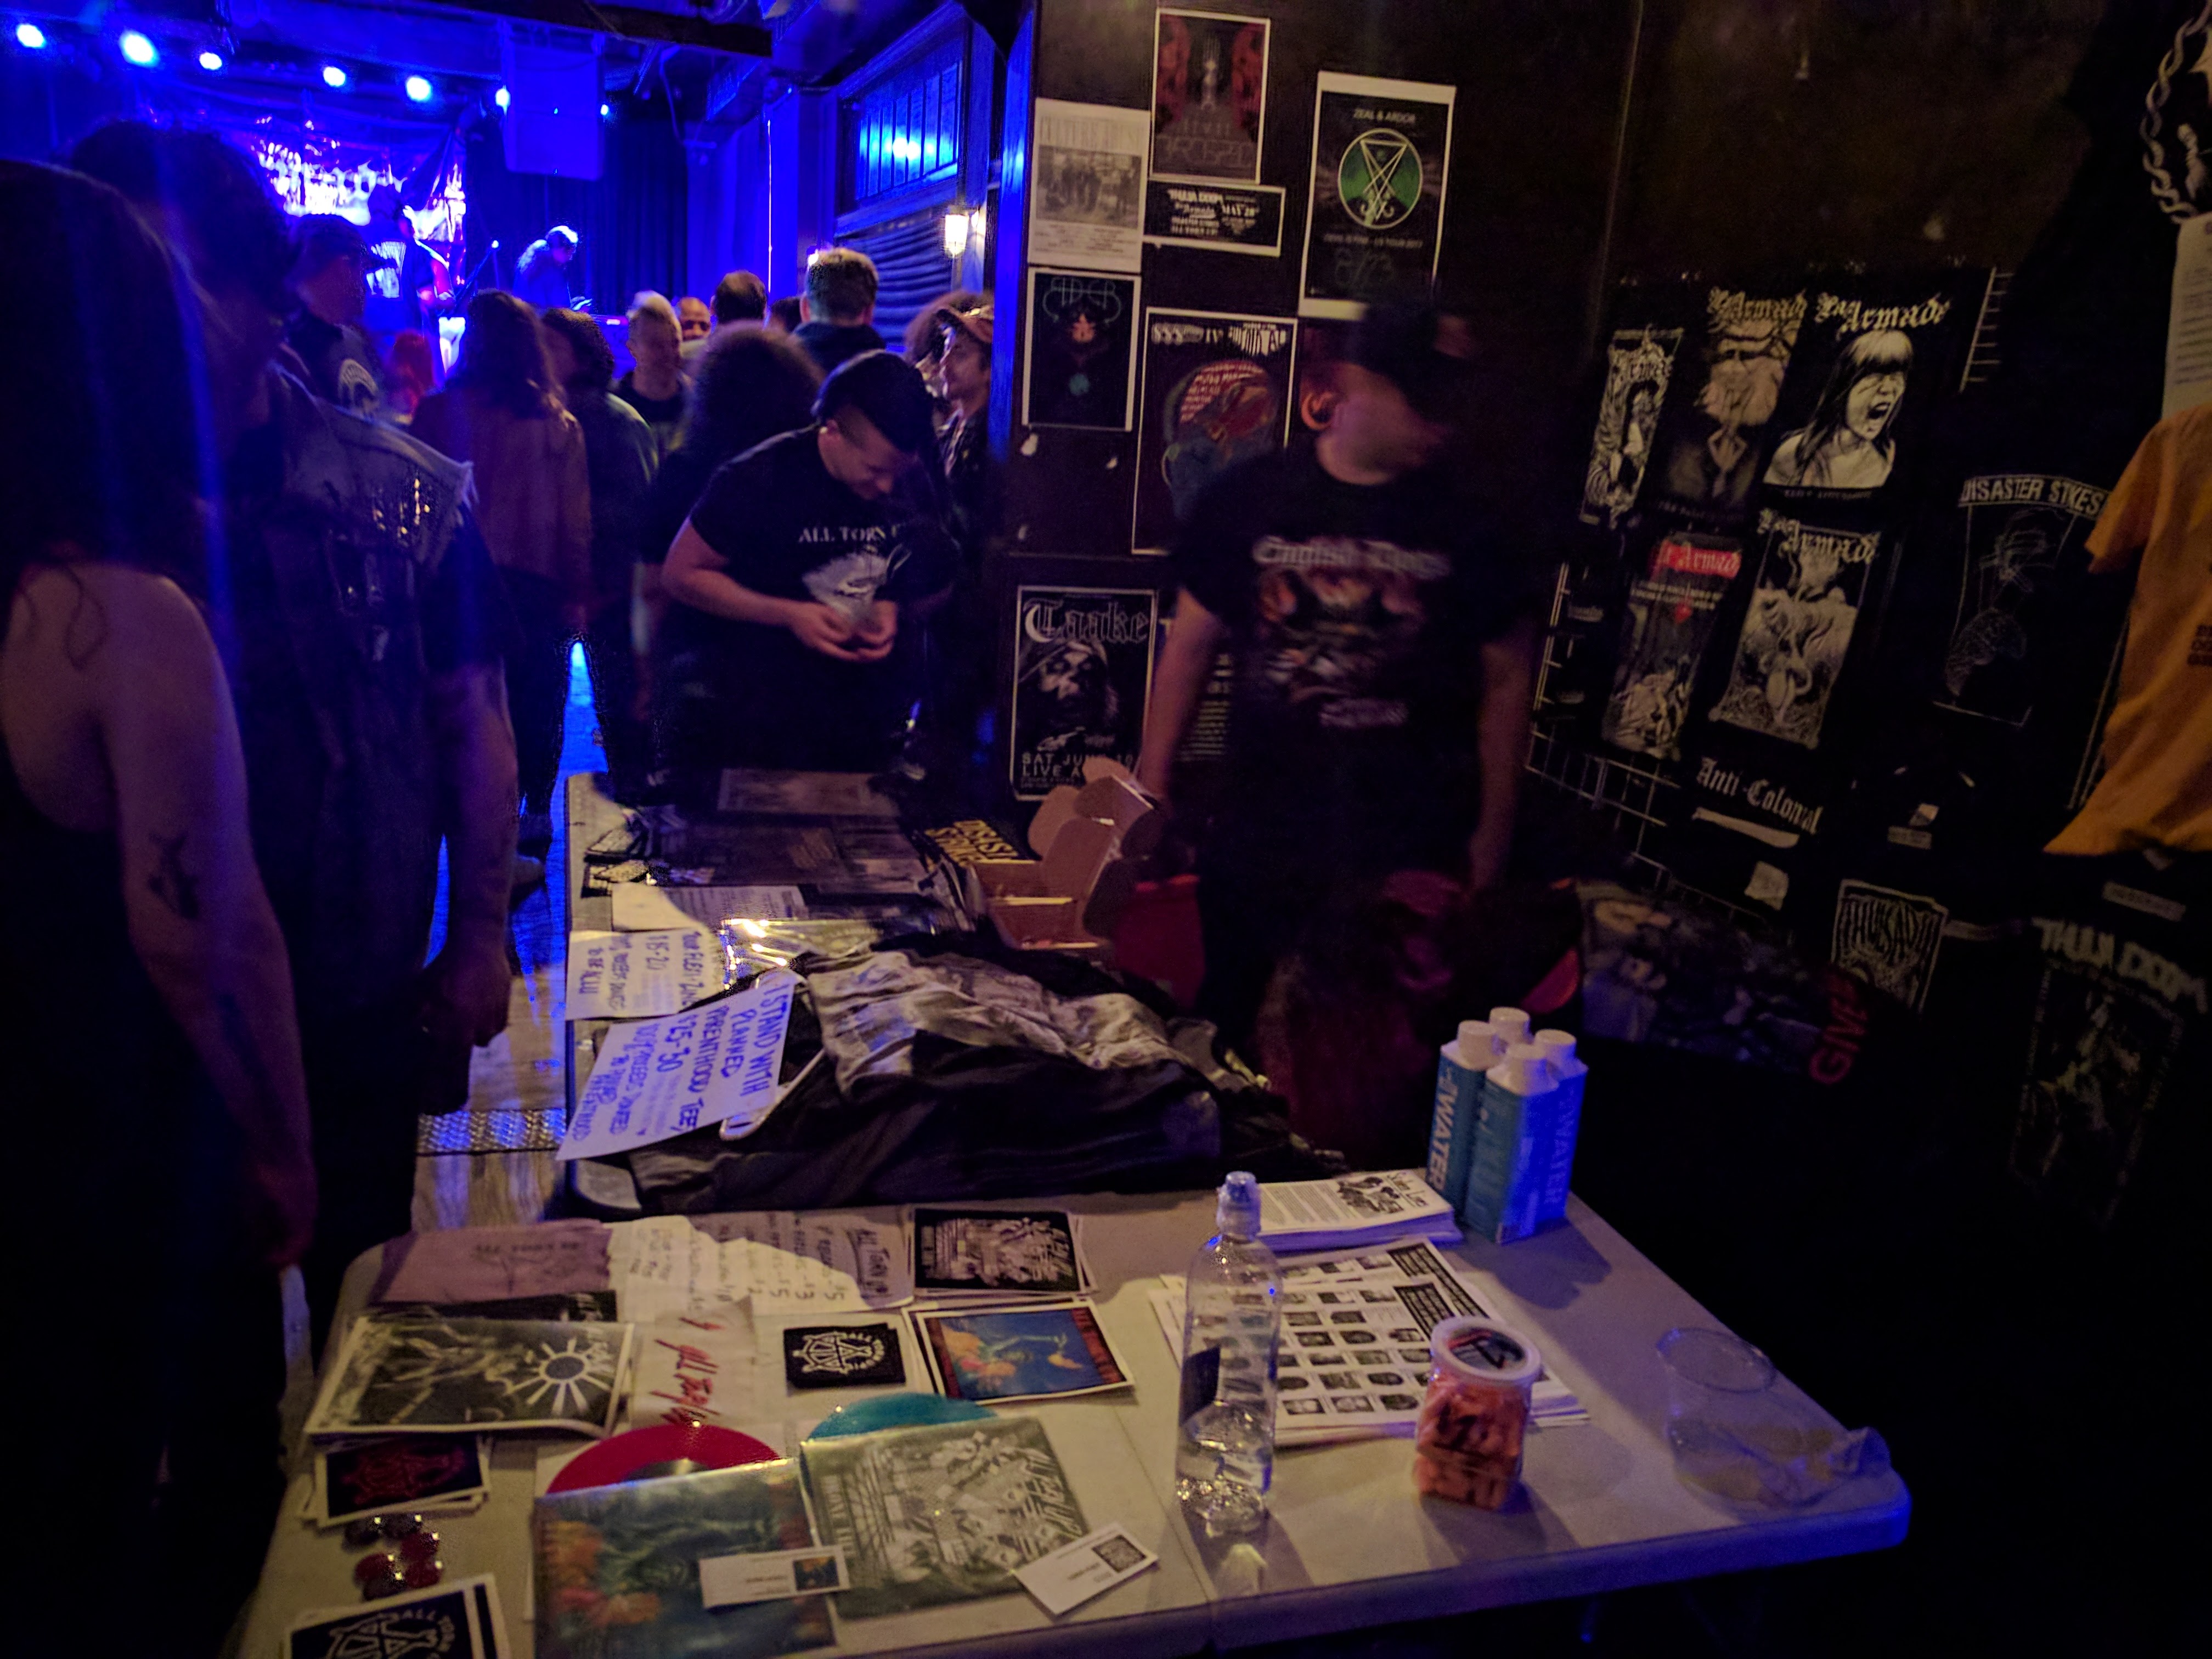 A scene from the tour with the merchandise table in the forefront and blue lights from the concert in the back.